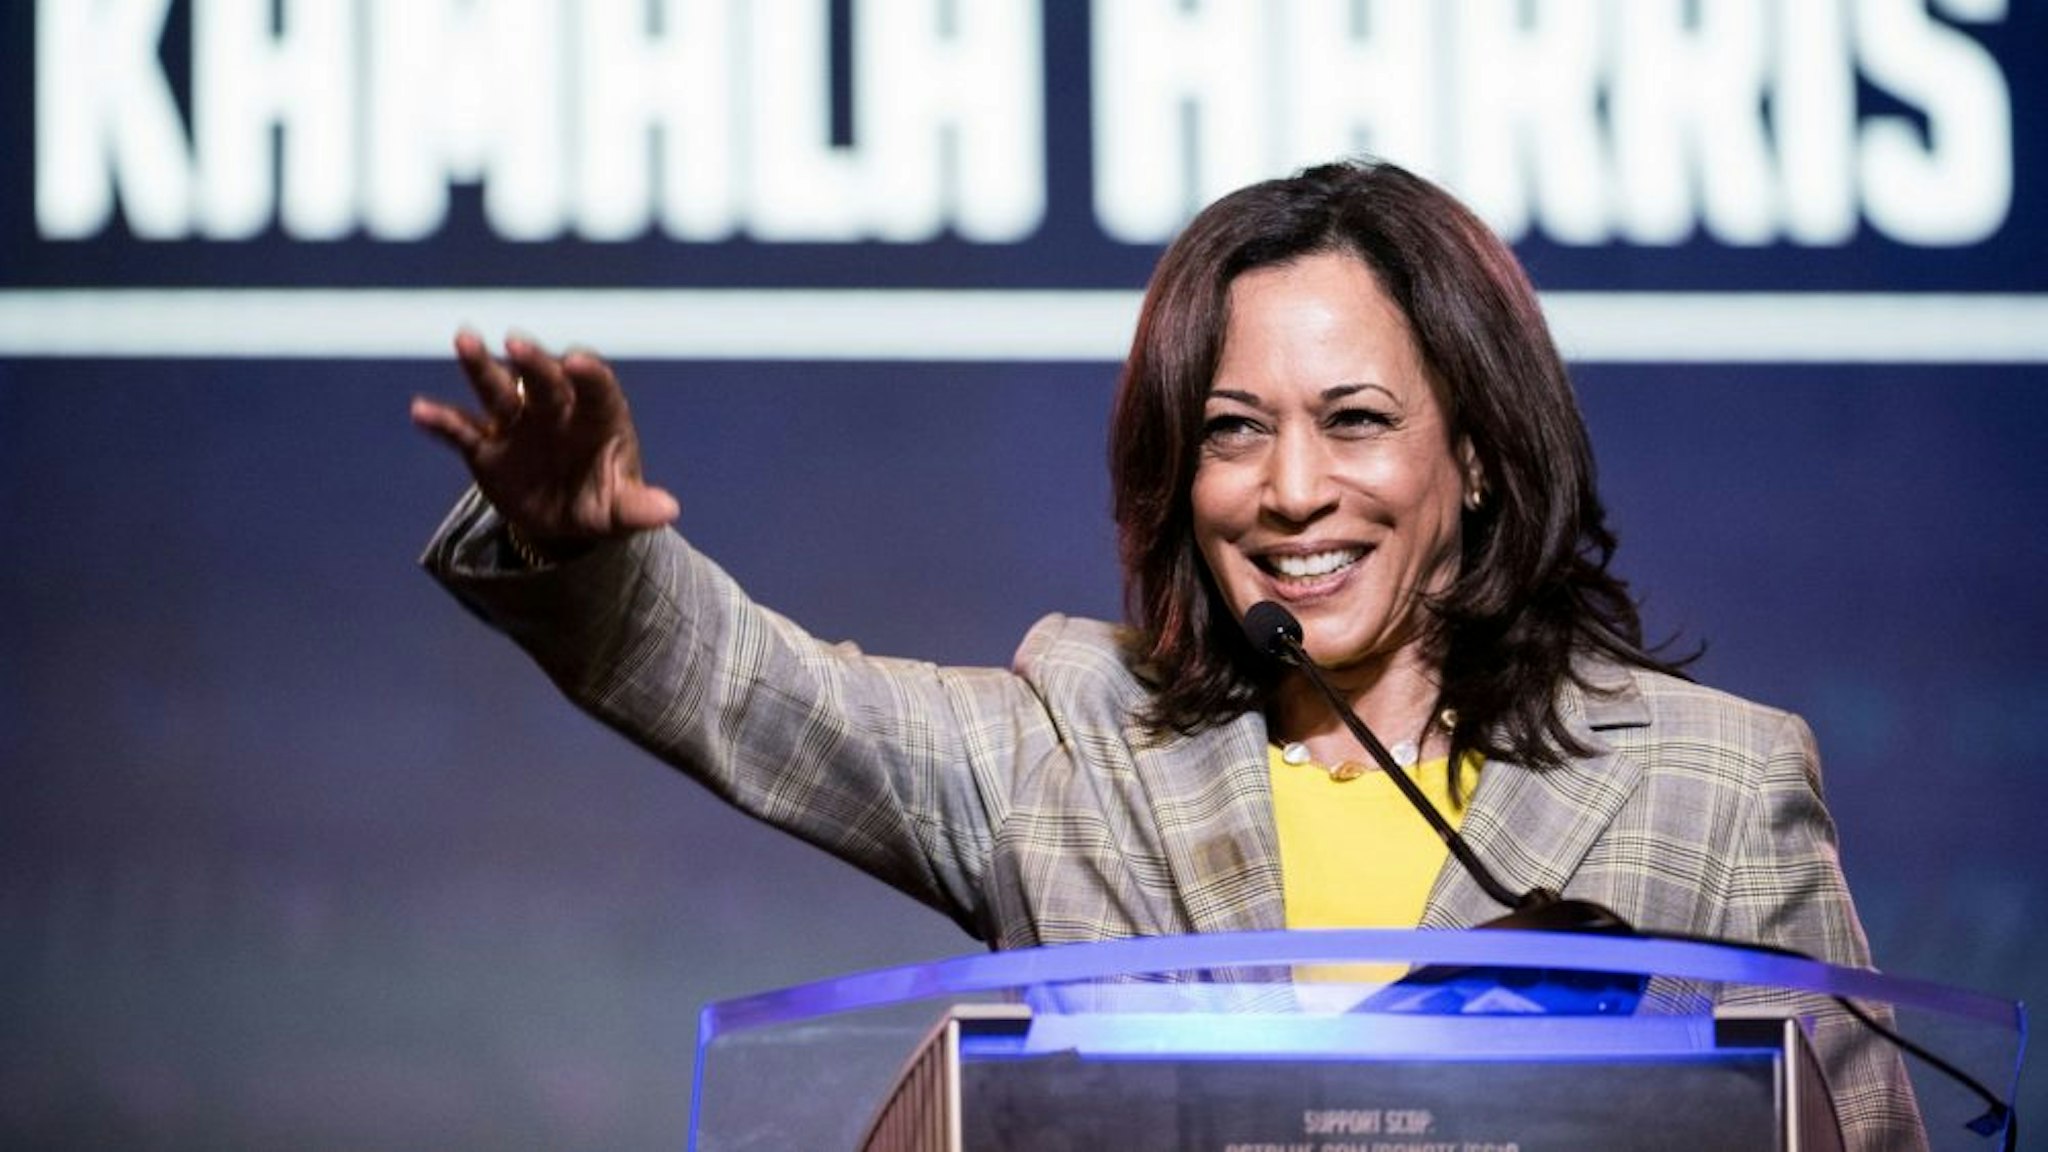 COLUMBIA, SC - JUNE 22: Democratic presidential candidate, Sen. Kamala Harris (D-CA) addresses the crowd at the 2019 South Carolina Democratic Party State Convention on June 22, 2019 in Columbia, South Carolina. Democratic presidential hopefuls are converging on South Carolina this weekend for a host of events where the candidates can directly address an important voting bloc in the Democratic primary.